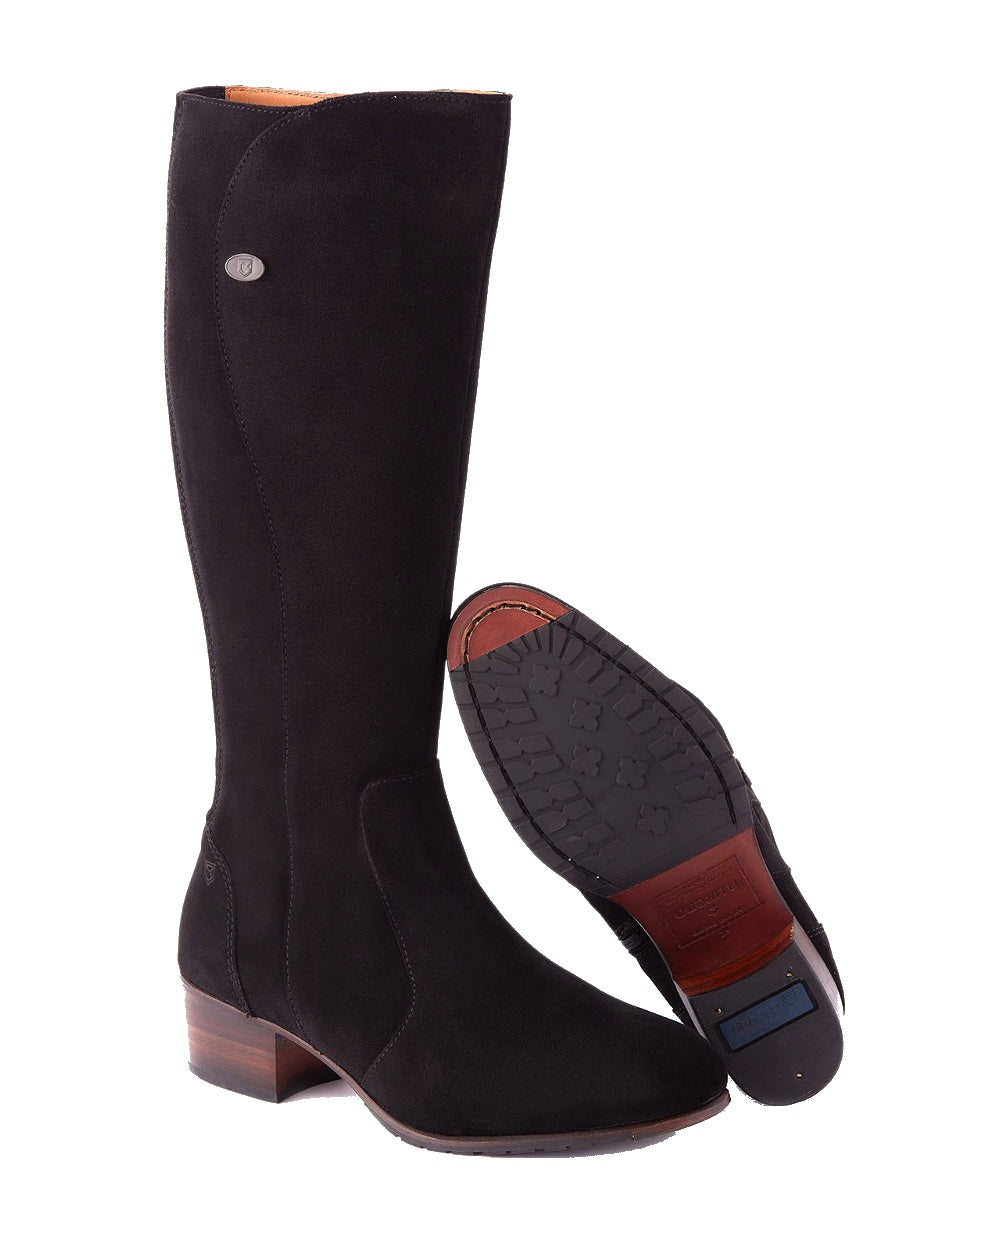 Dubarry Downpatrick Knee High Boots in Black Suede 